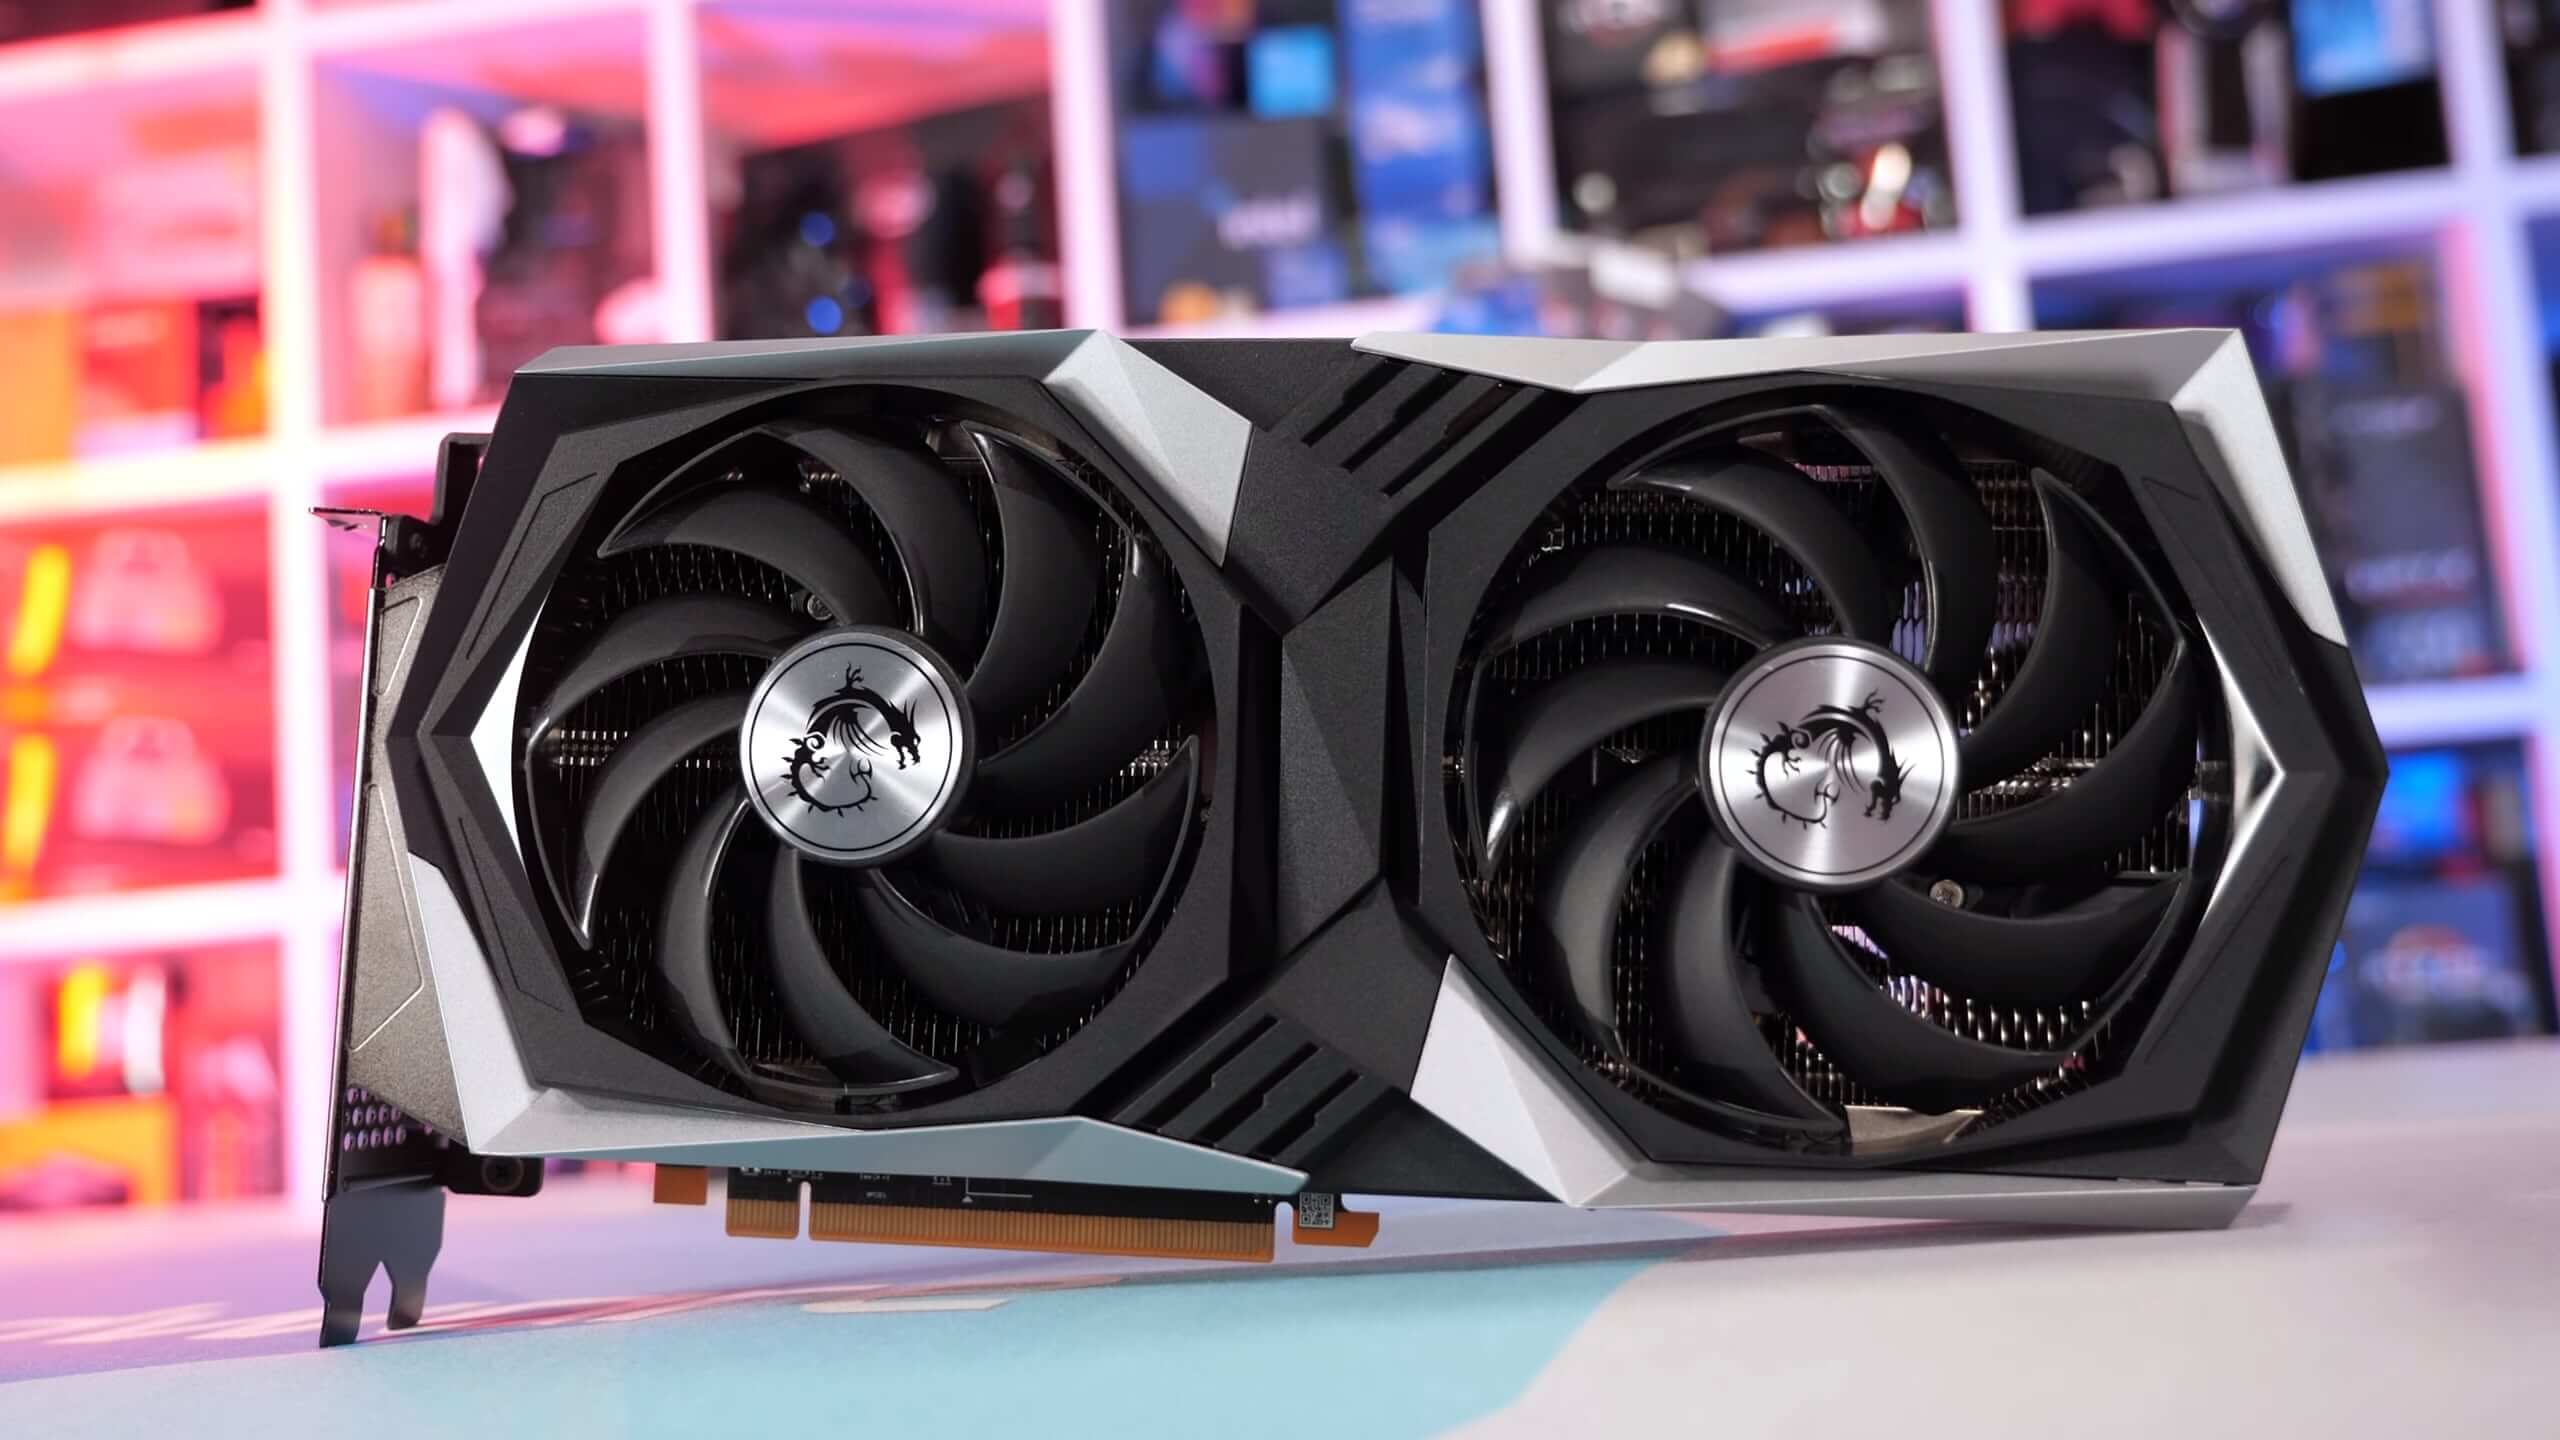 A pricing and availability update on the Radeon RX 6600 XT and how the GPU market is shaping up